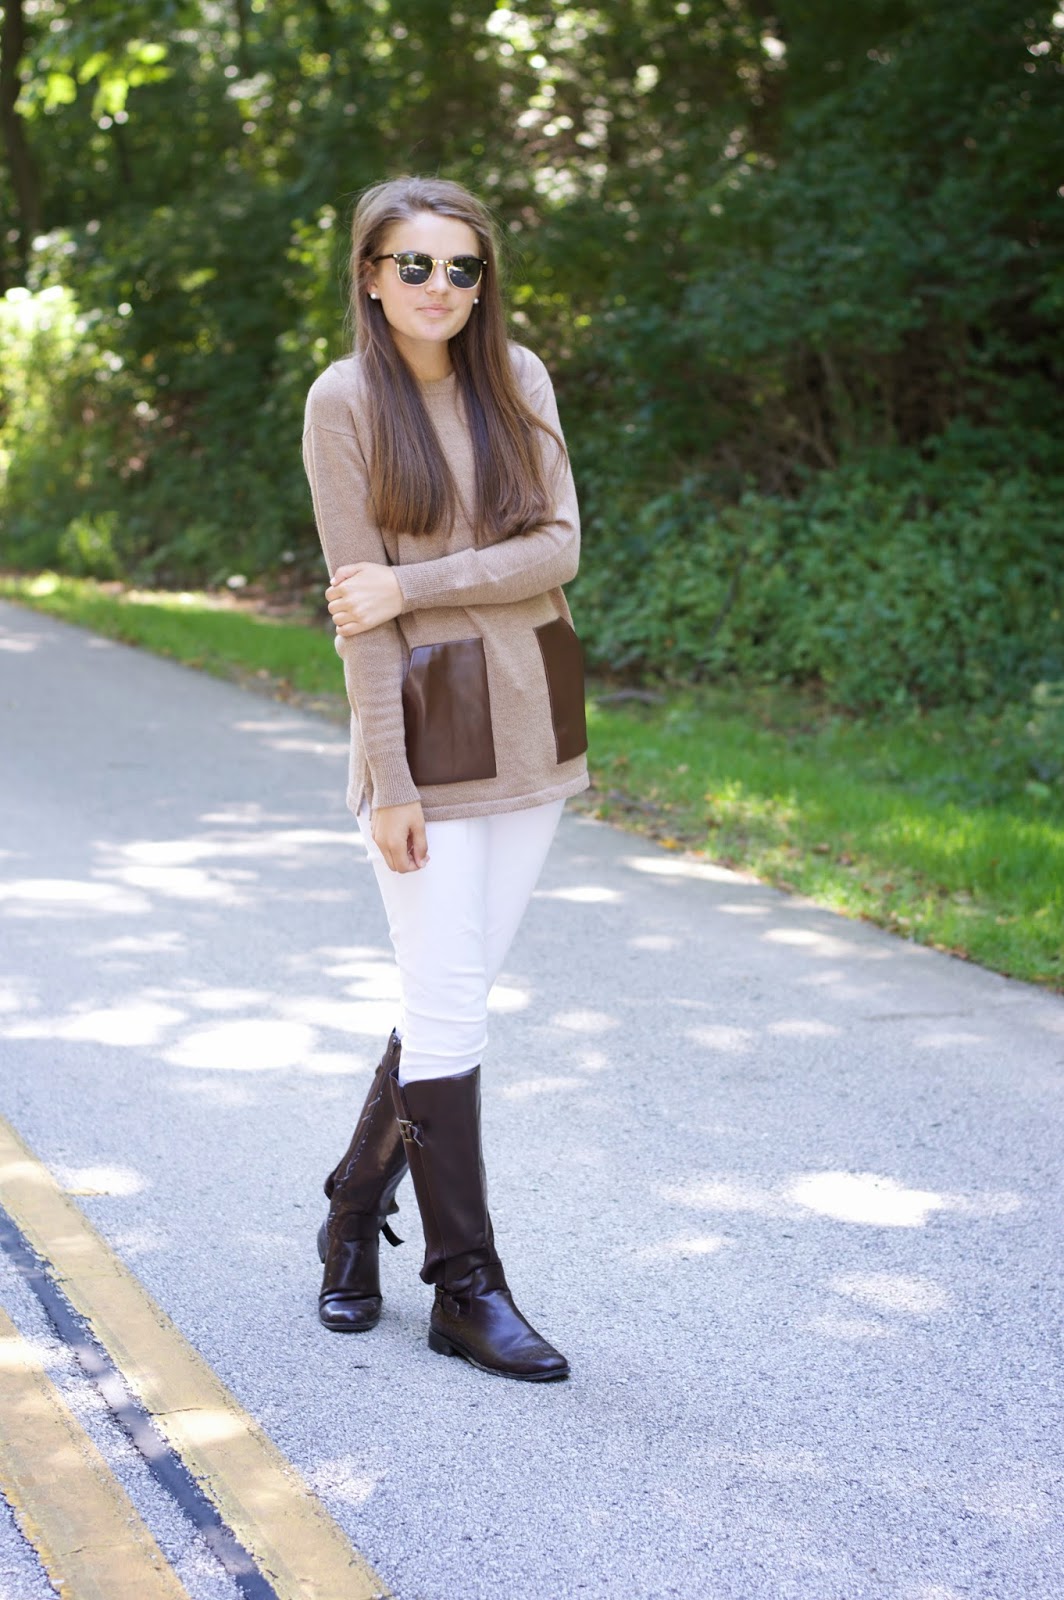 citrus and style: Outfit: White Jeans + Leather Details